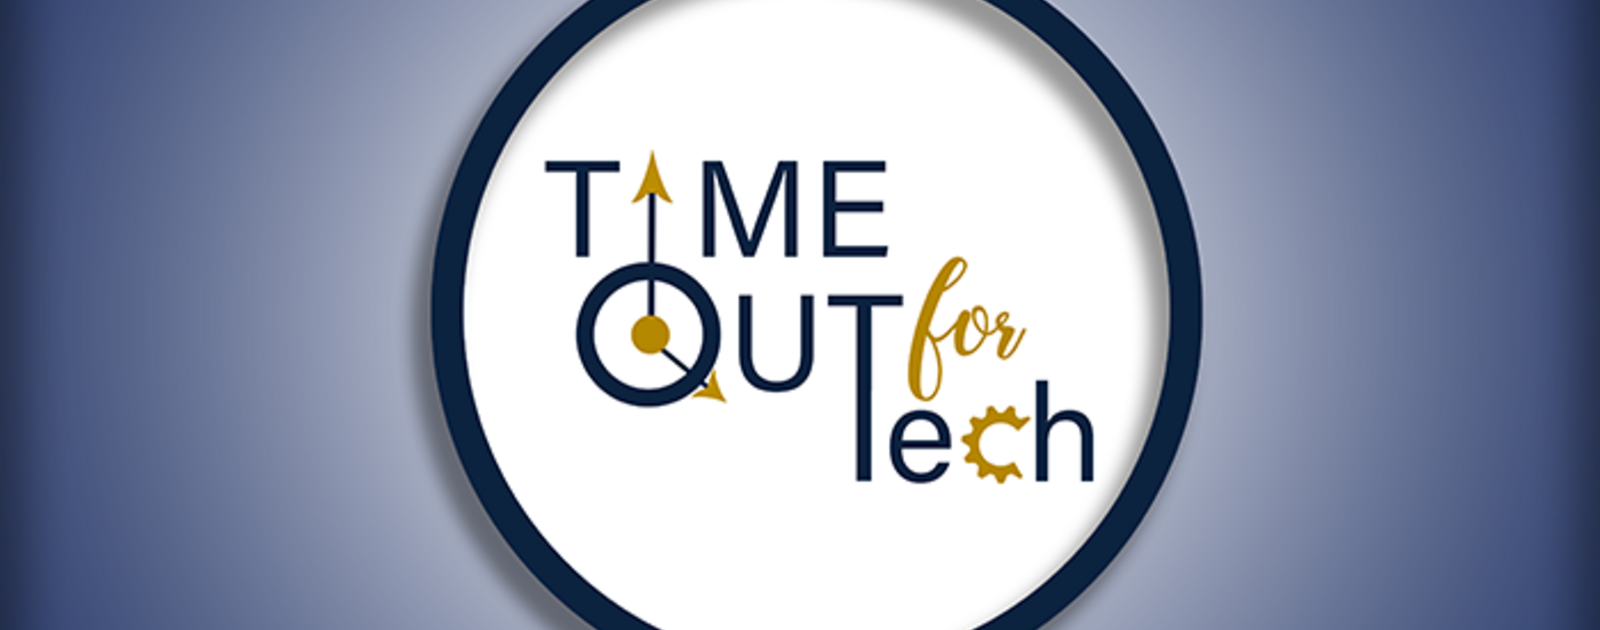 Make Time for TimeOut for Tech News and Updates About Office of